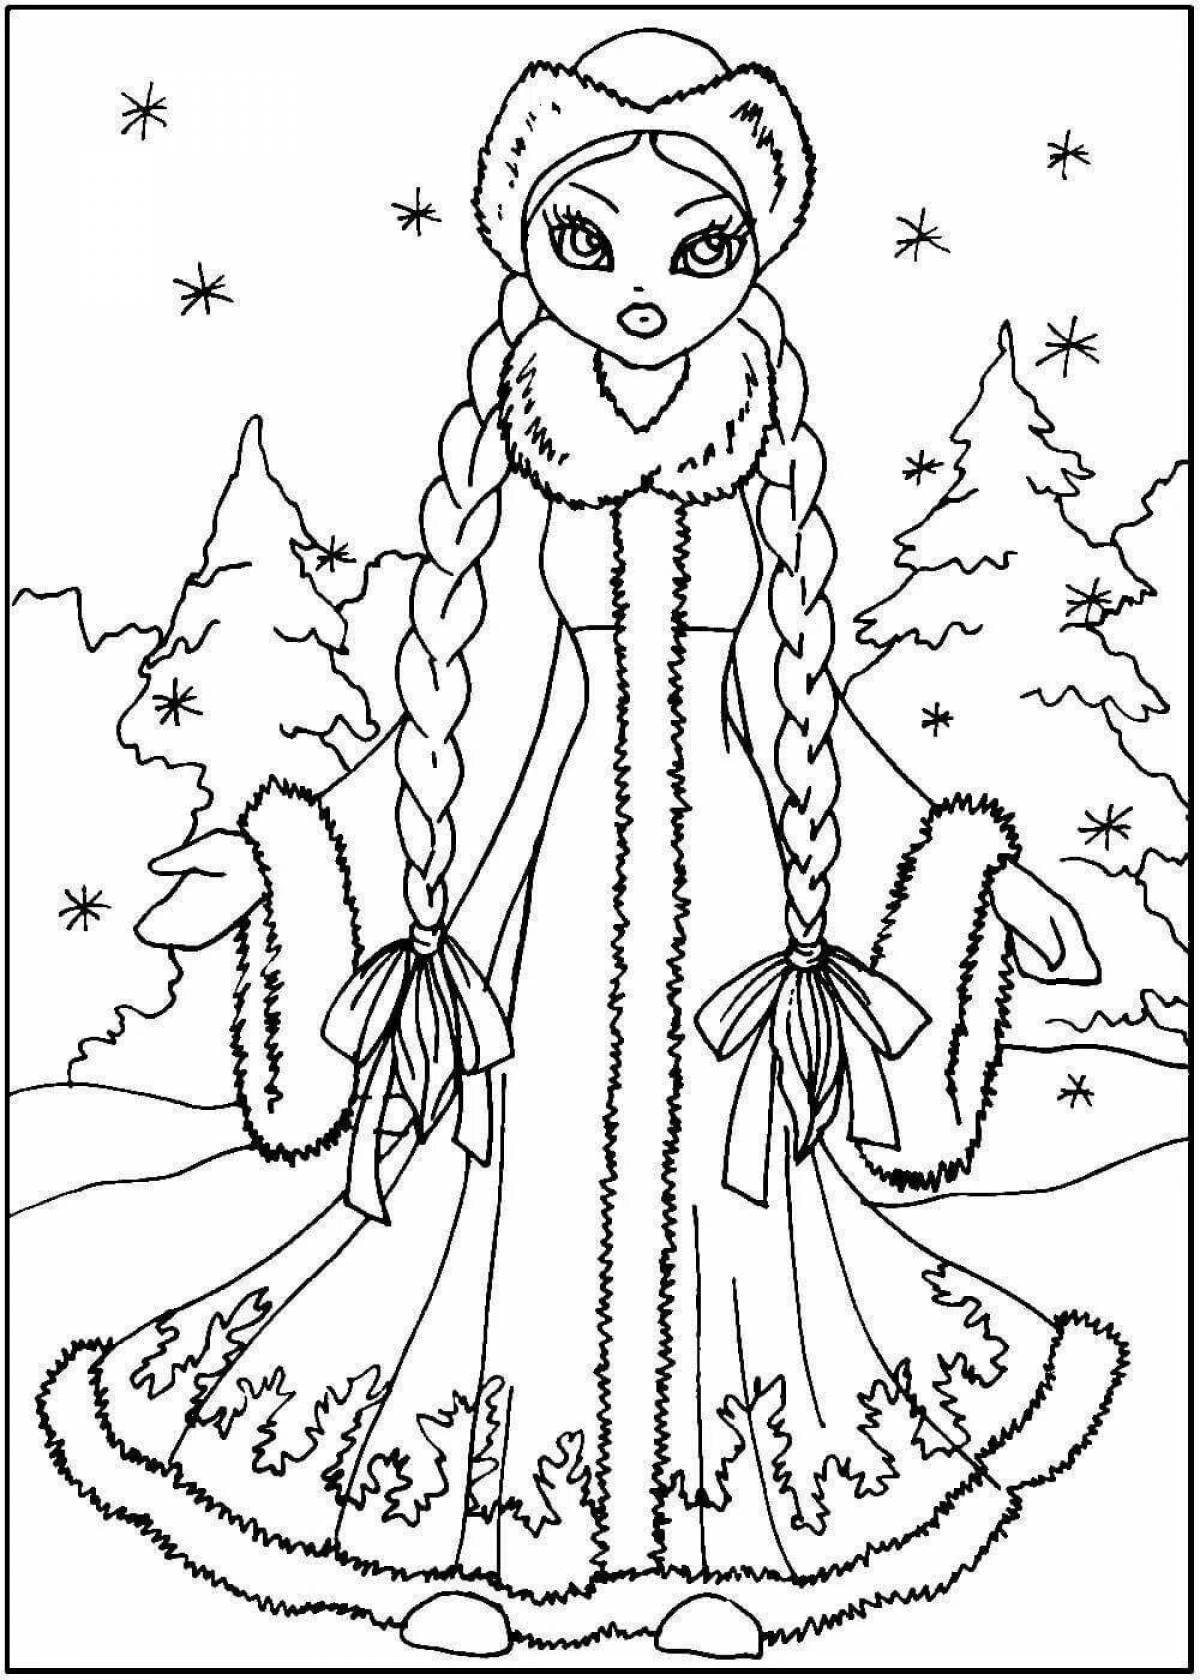 Snow Maiden majestic coloring